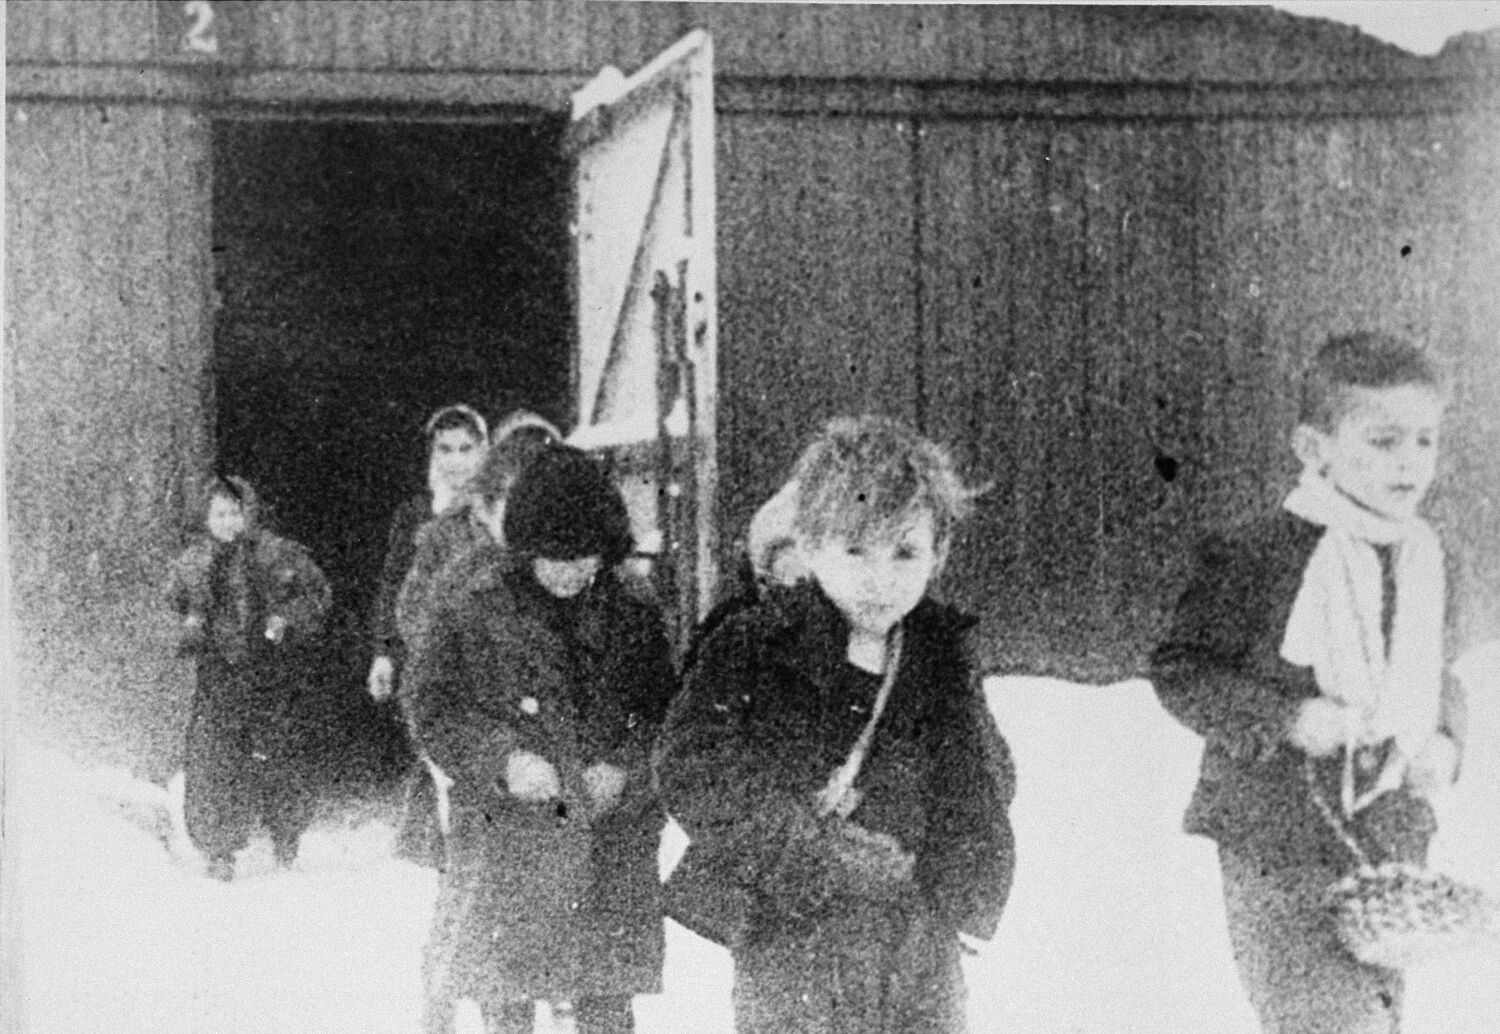 Young children in jackets and scarves walking out of a large door in a wooden building, snow on the ground.